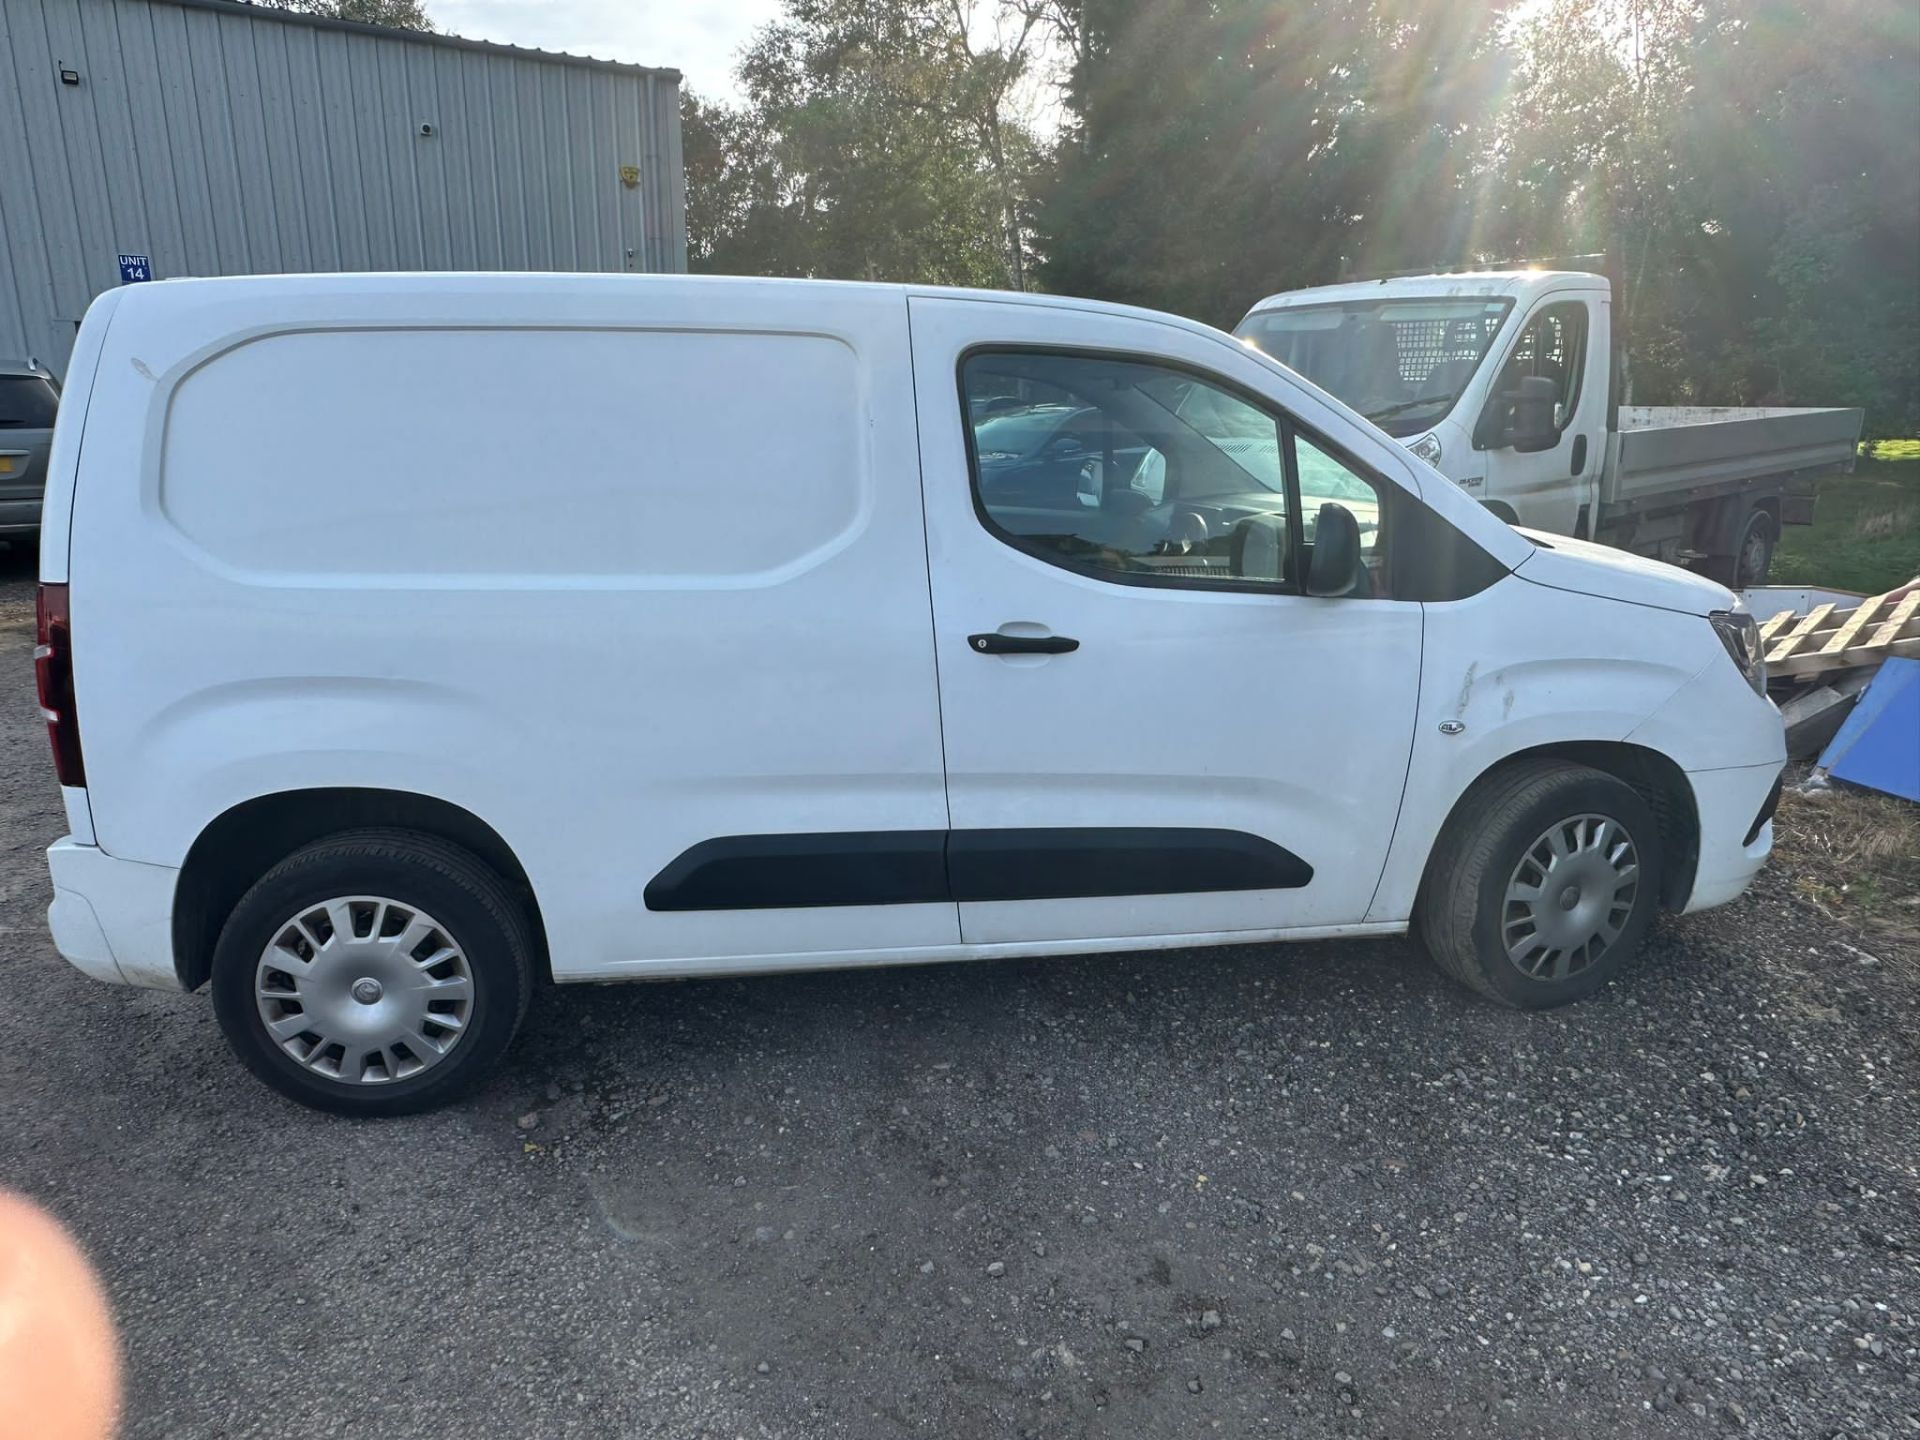 2019 69 VAUXHALL COMBO SPORTIVE PANEL VAN - 60K MILES - AIR CON - PLY LINED